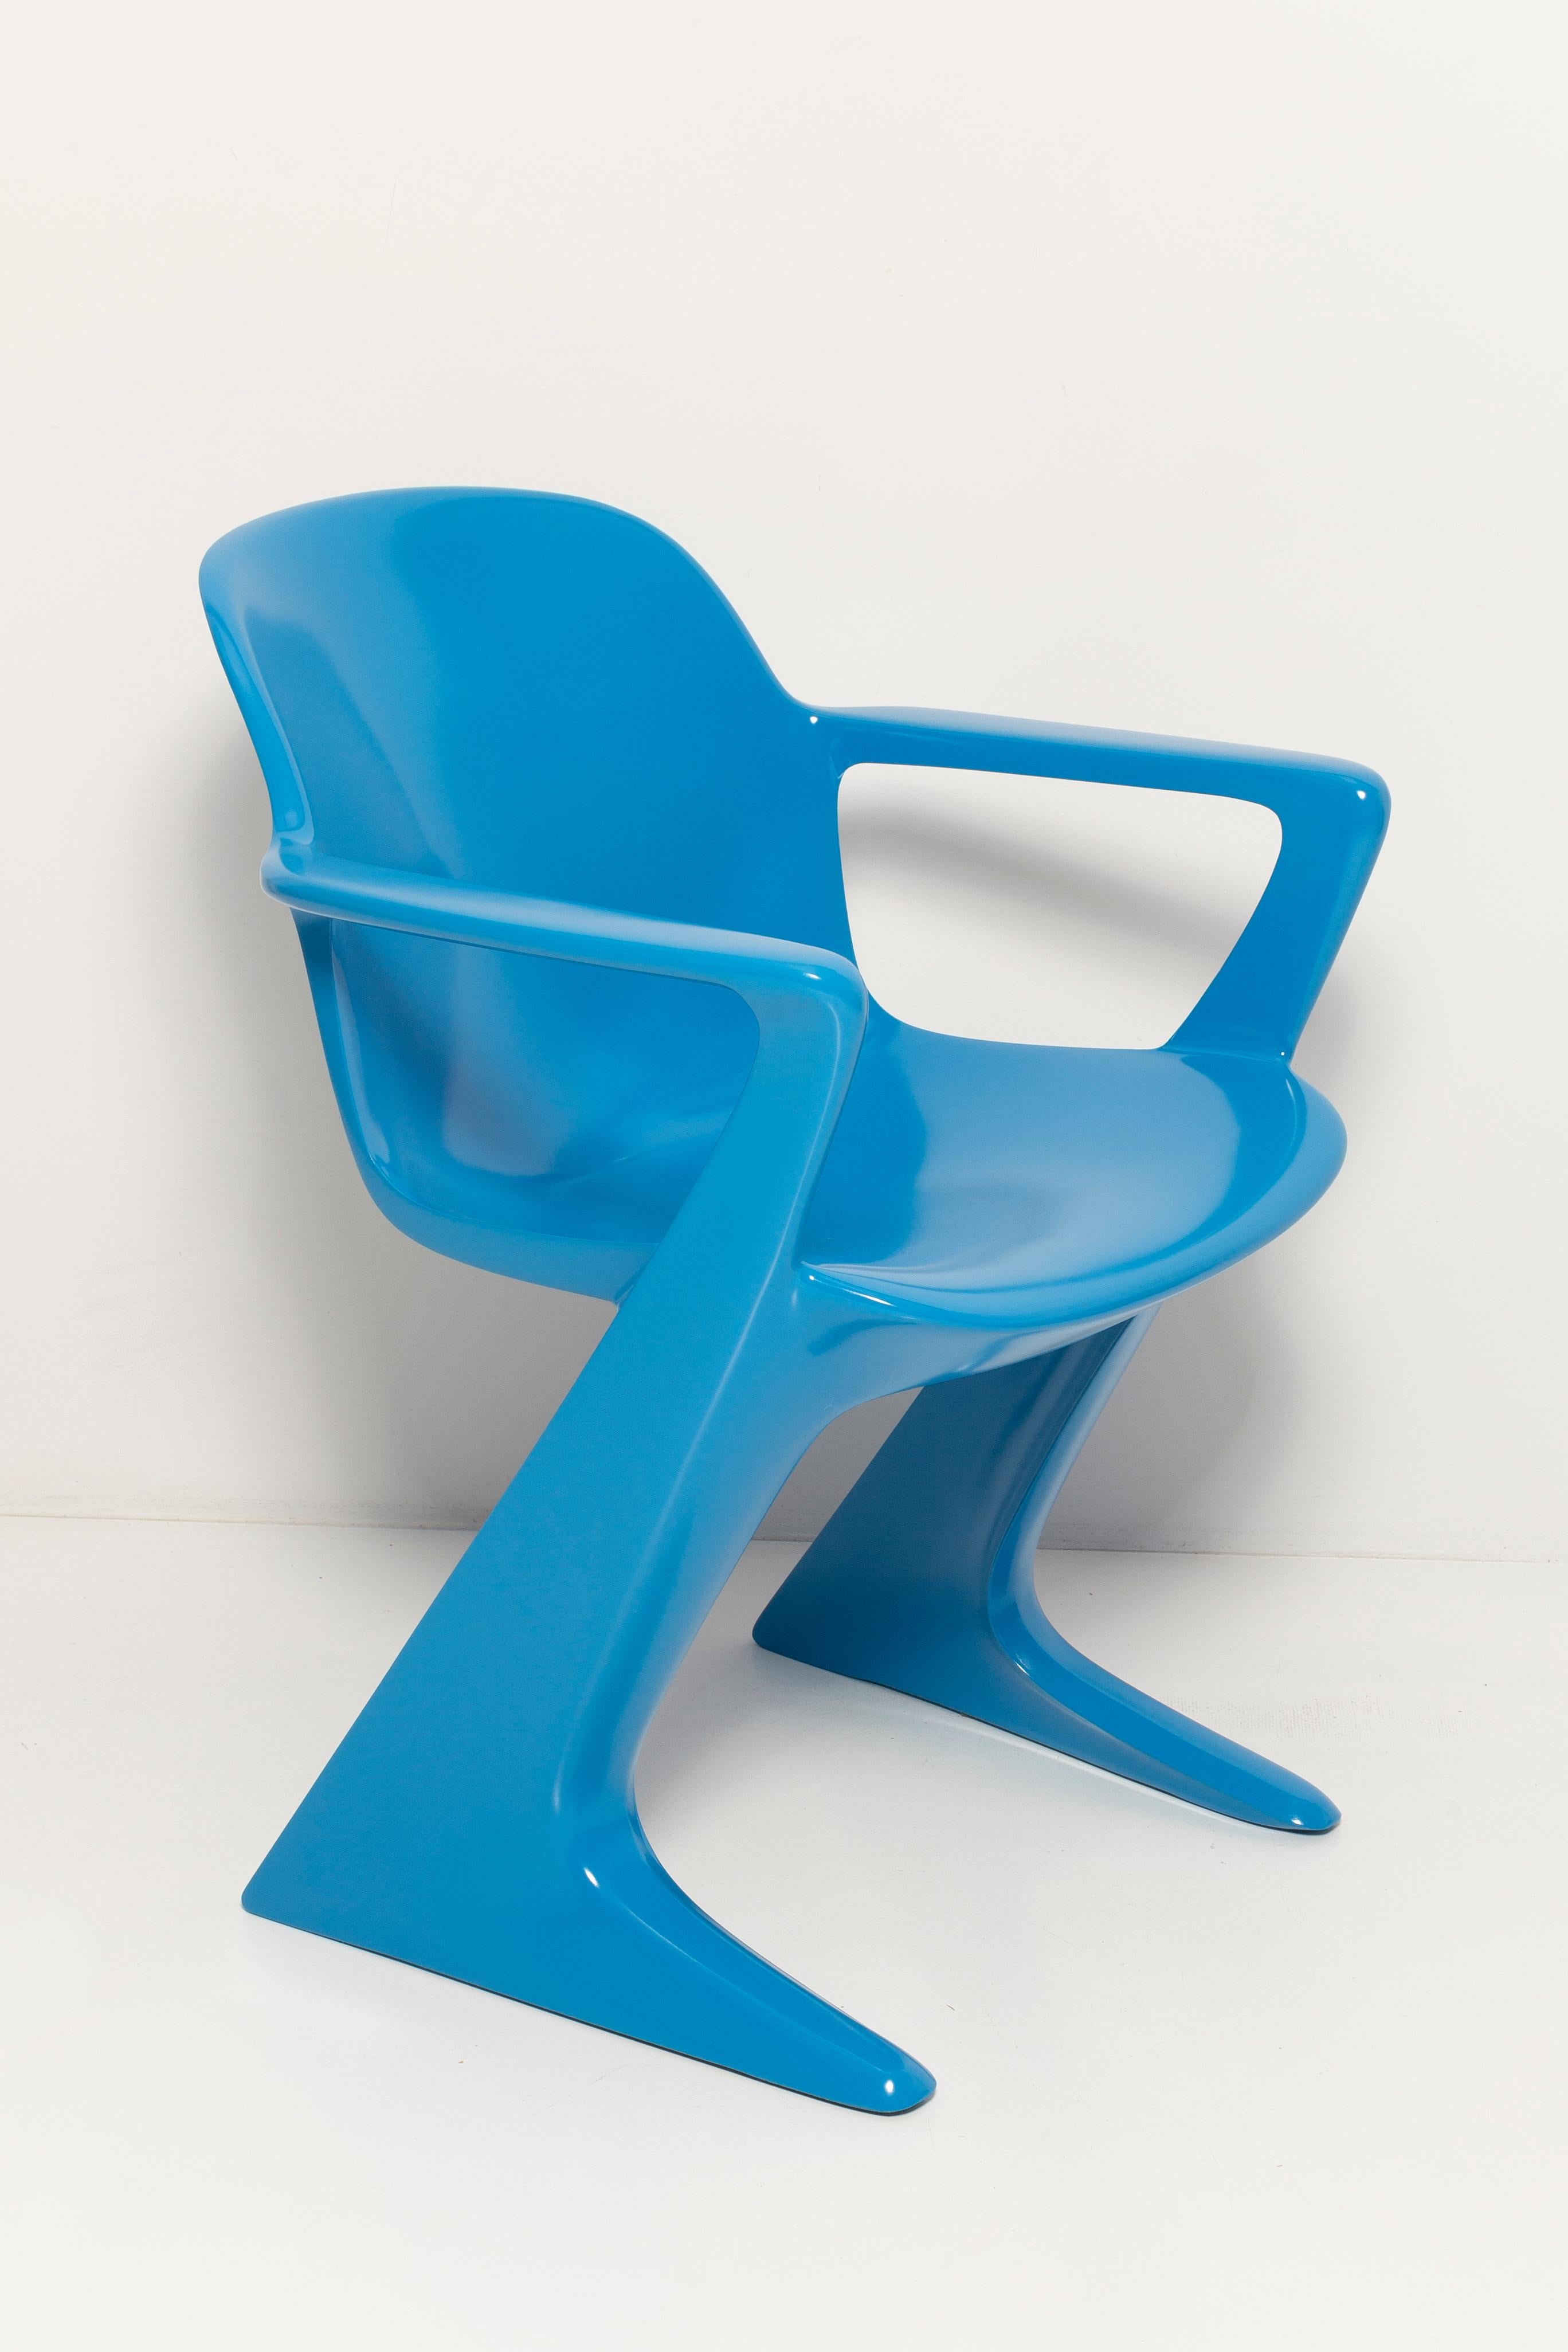 This model is called Z-chair. Designed in 1968 in the GDR by Ernst Moeckl and Siegfried Mehl, German Version of the Panton chair. Also called kangoroo chair or variopur chair. Produced in eastern Germany.

Chairs are after renovation - new semi